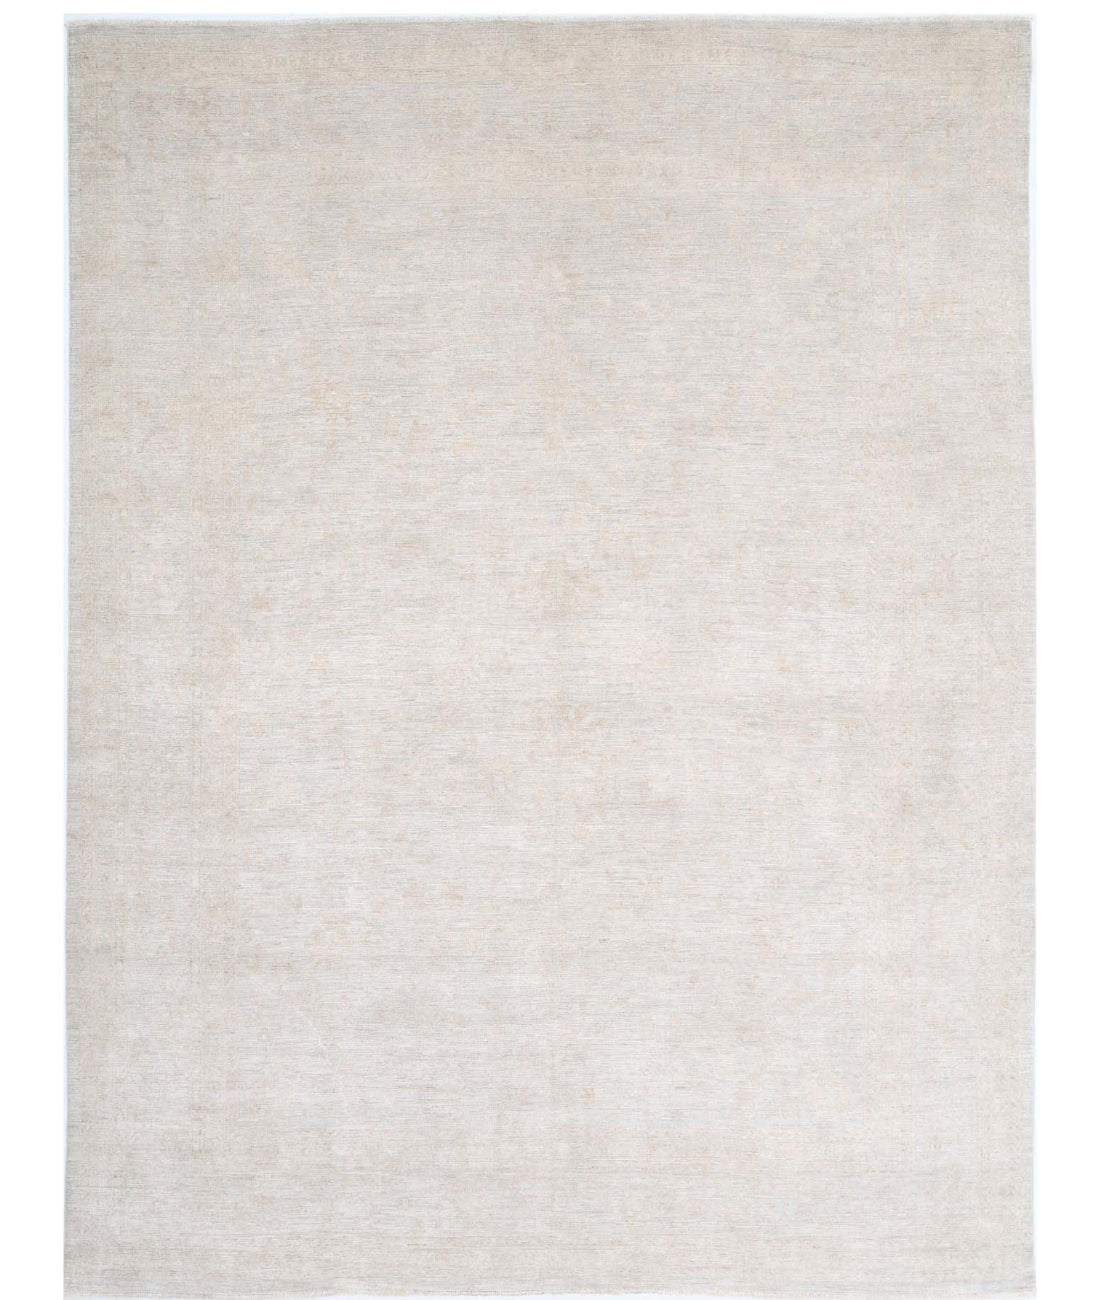 Hand Knotted Oushak Wool Rug - 11'4'' x 15'3'' 11'4'' x 15'3'' (340 X 458) / Blue / Teal